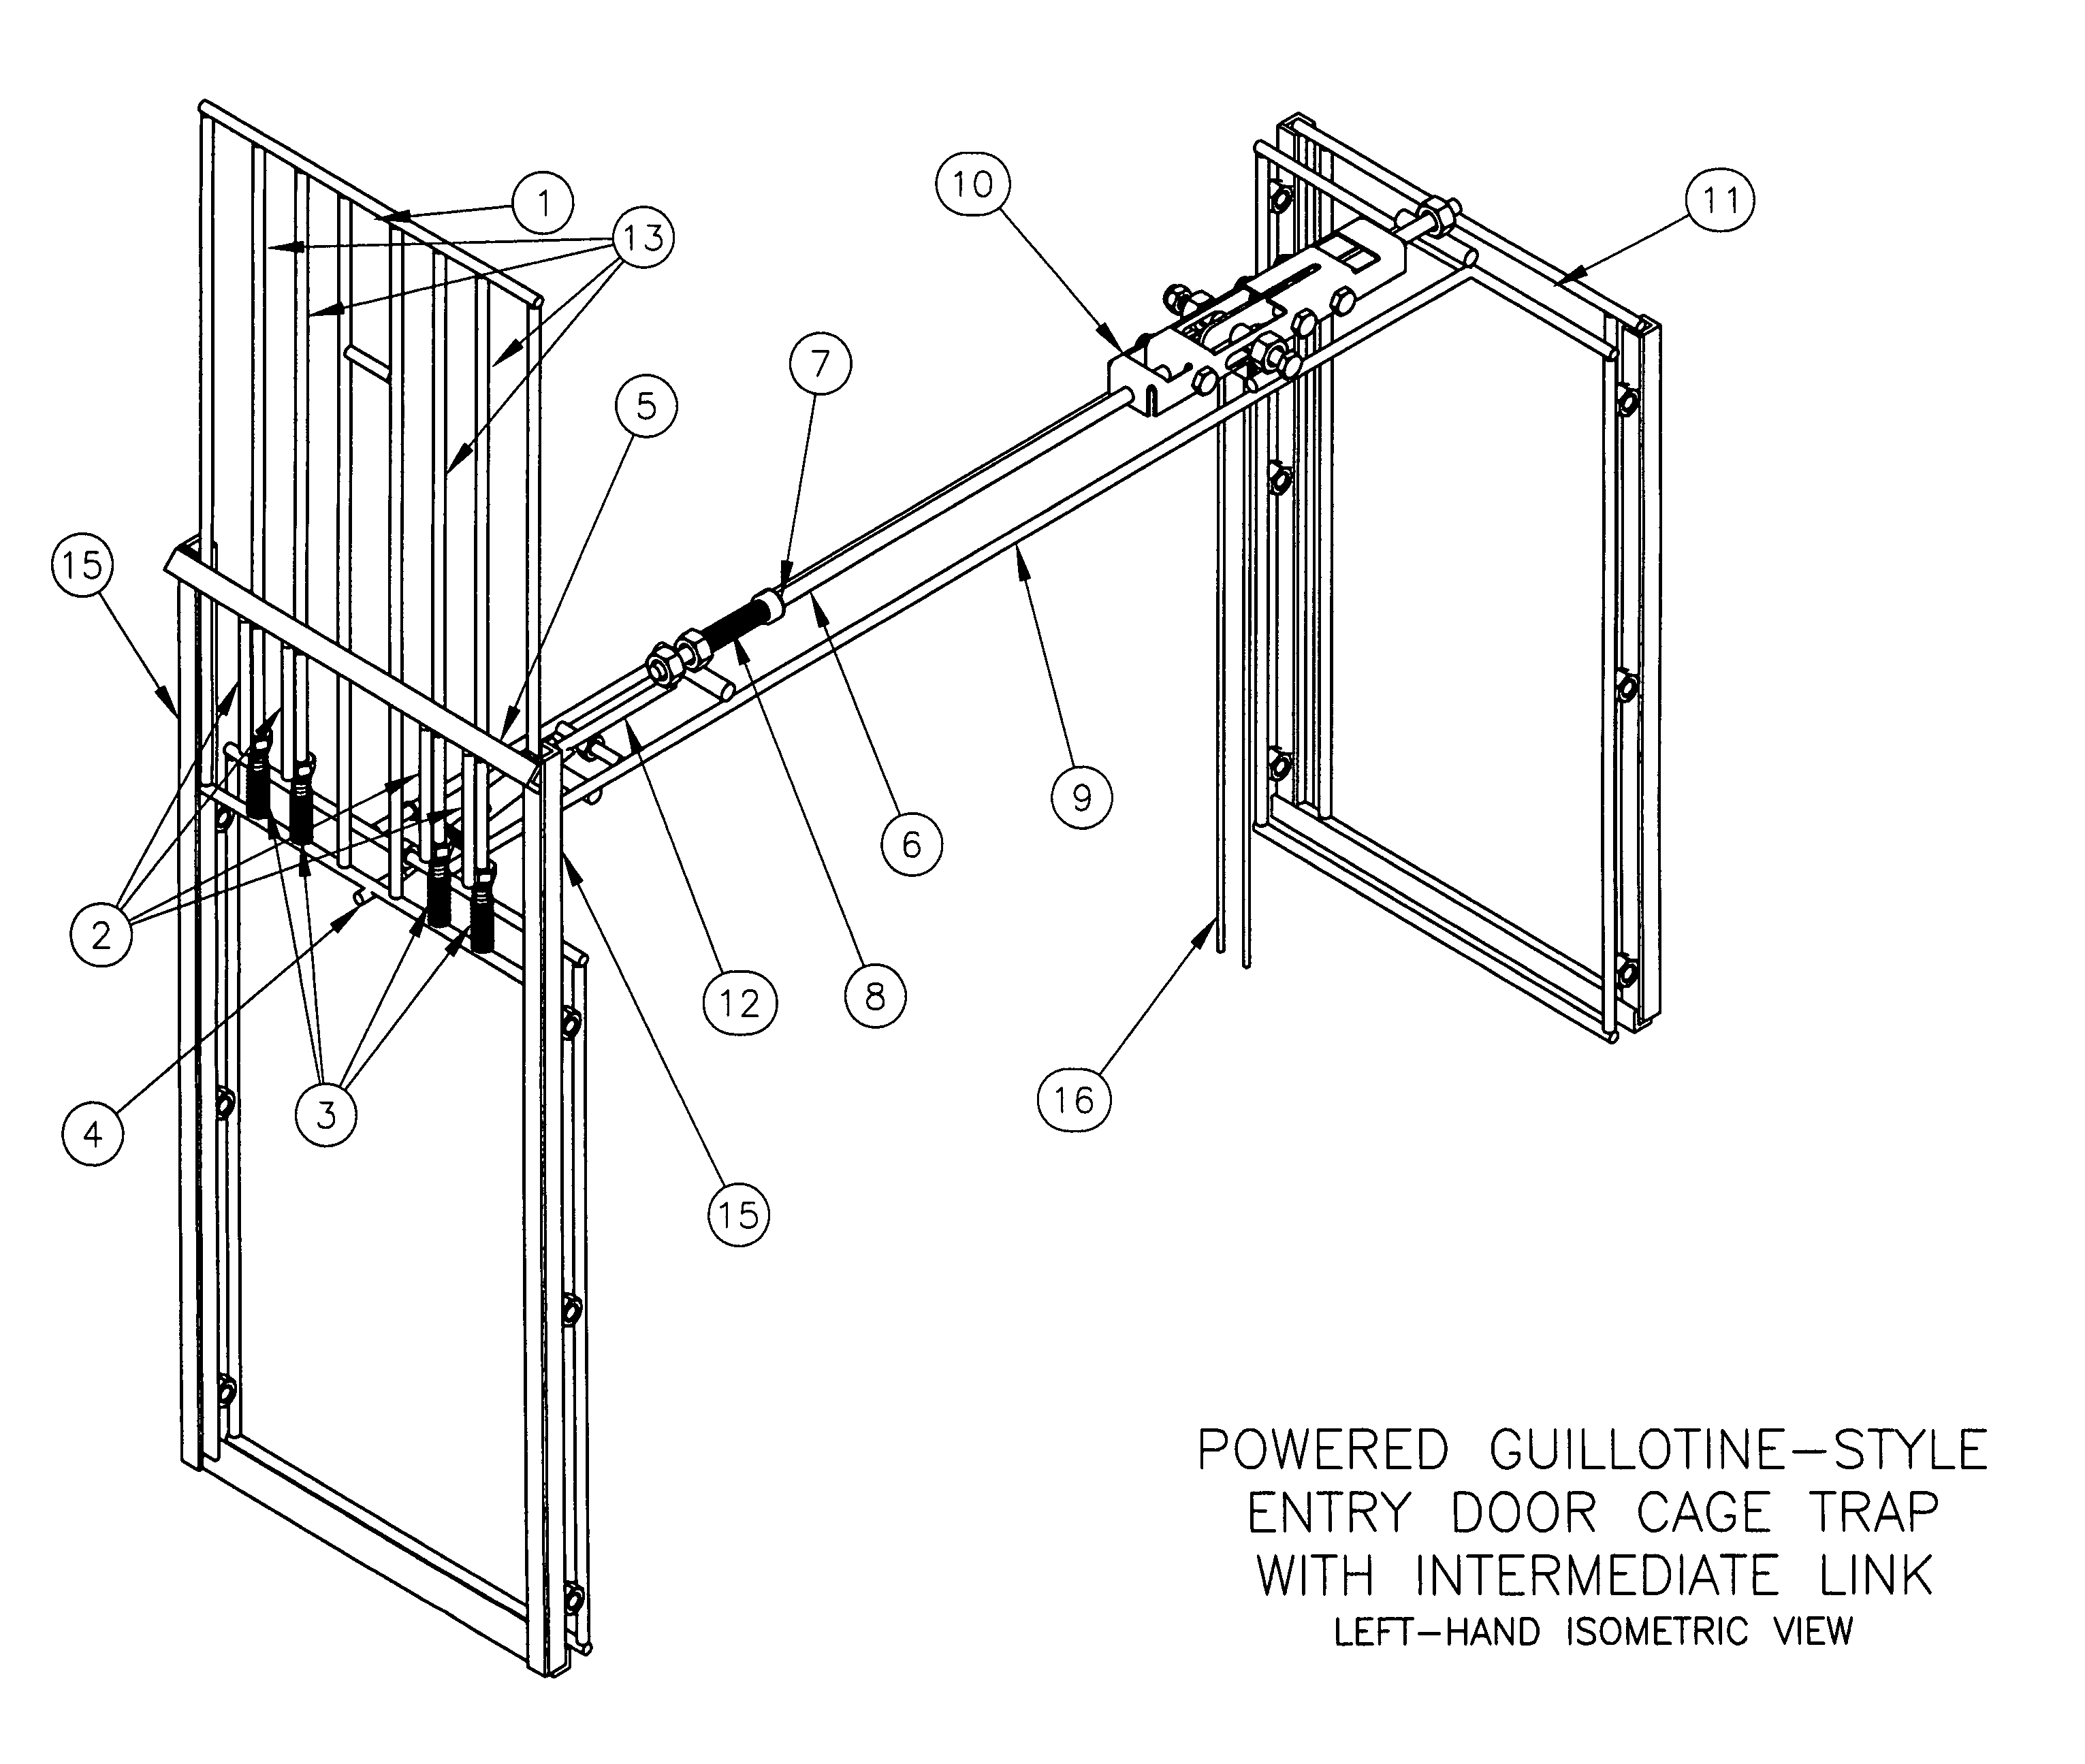 Advanced-powered sliding or guillotine door trap system for cage or corral-type animal traps